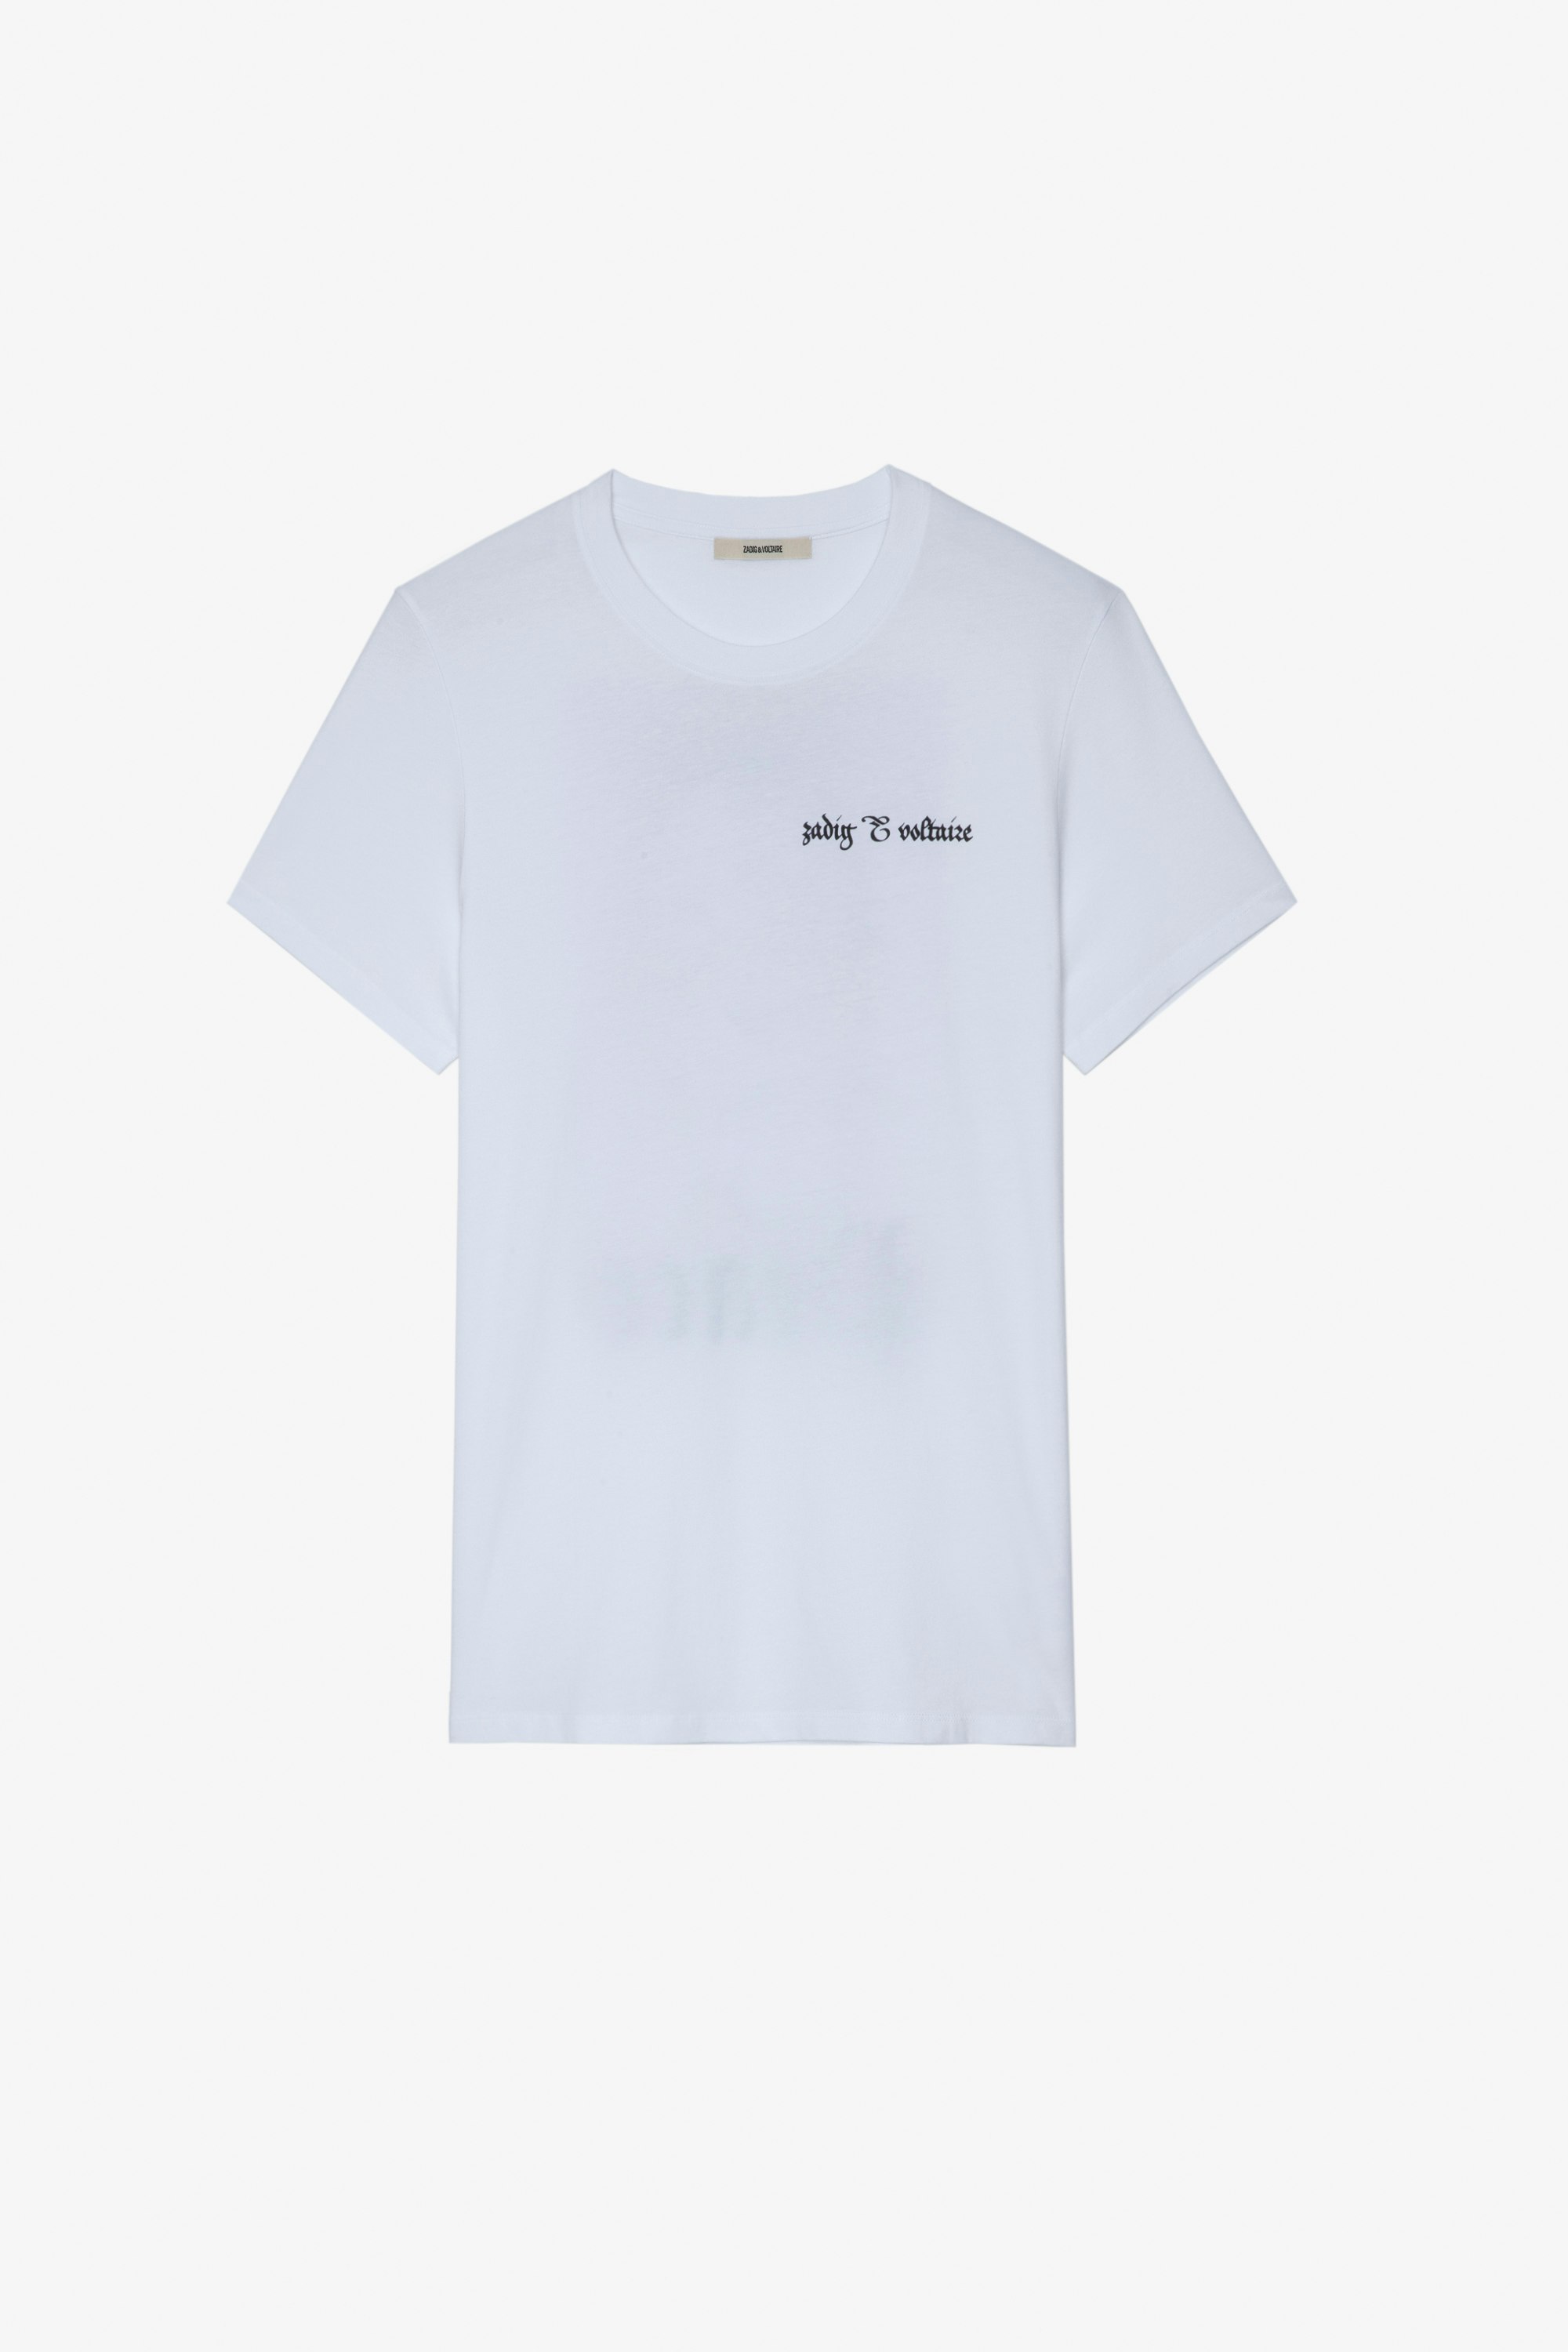 Ted T-Shirt Men's white cotton T-shirt with ZV signature on the front and "Peace" lion photo print on the back